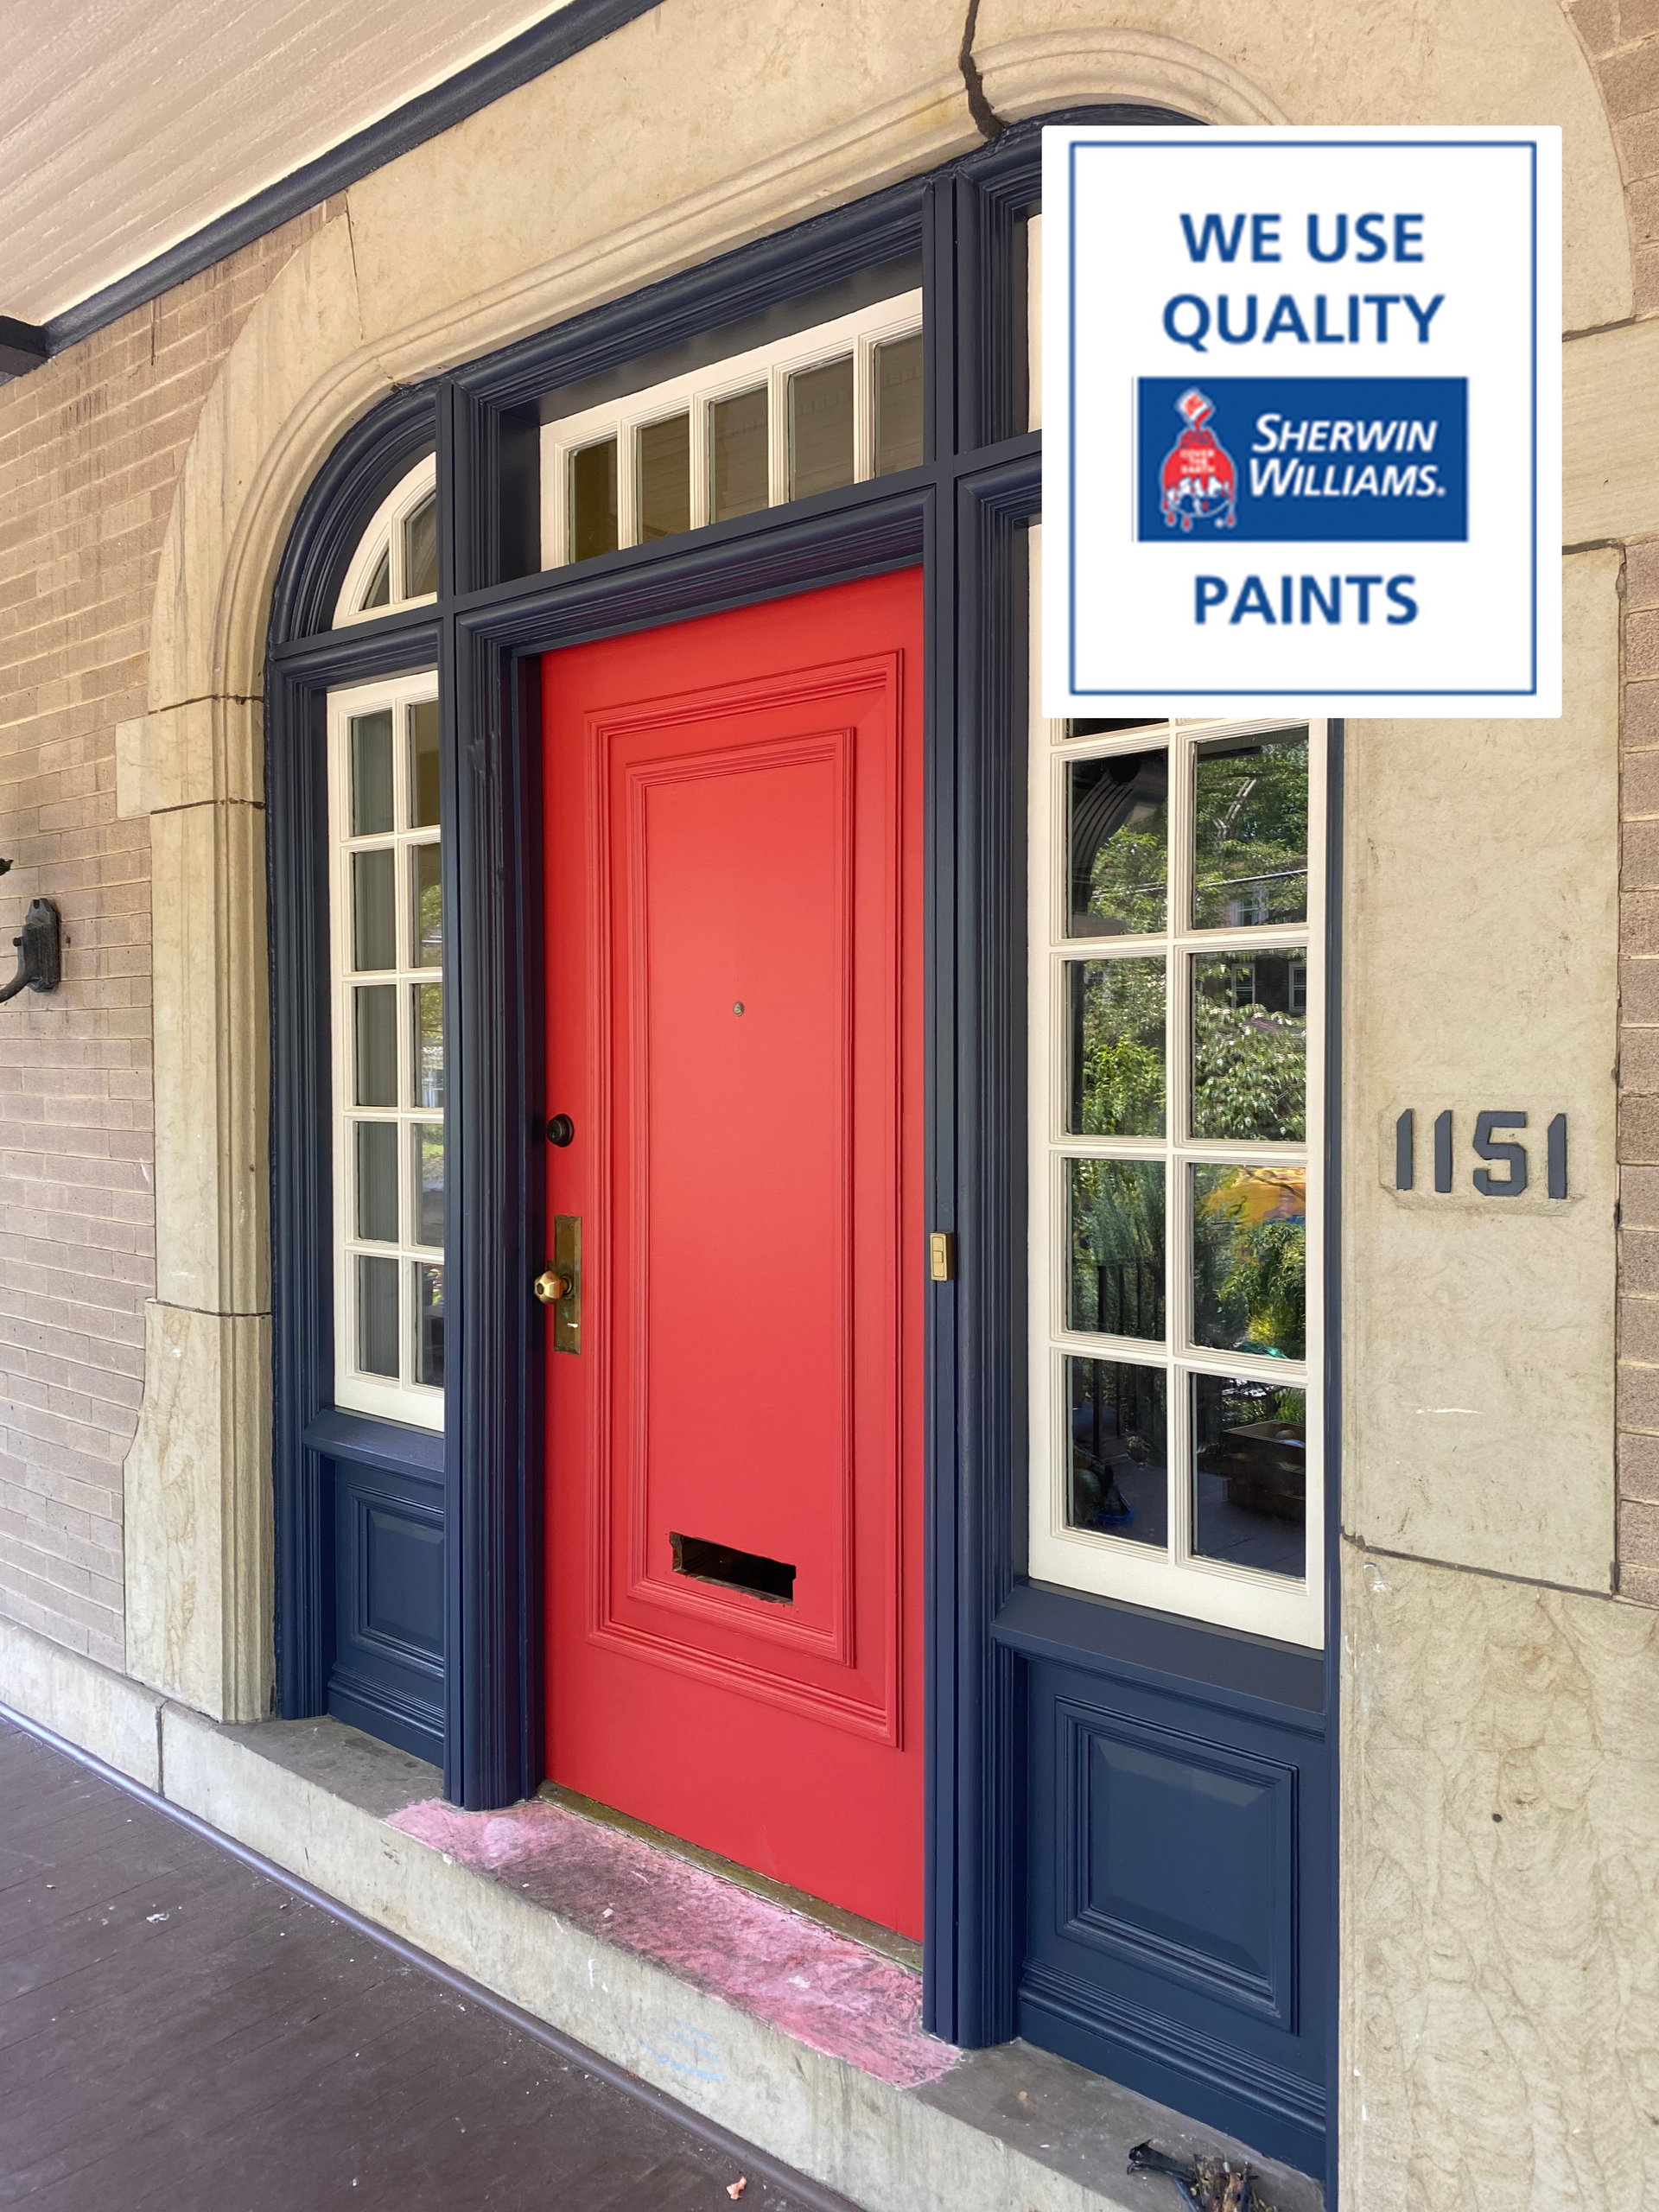 Importance of Paint Quality